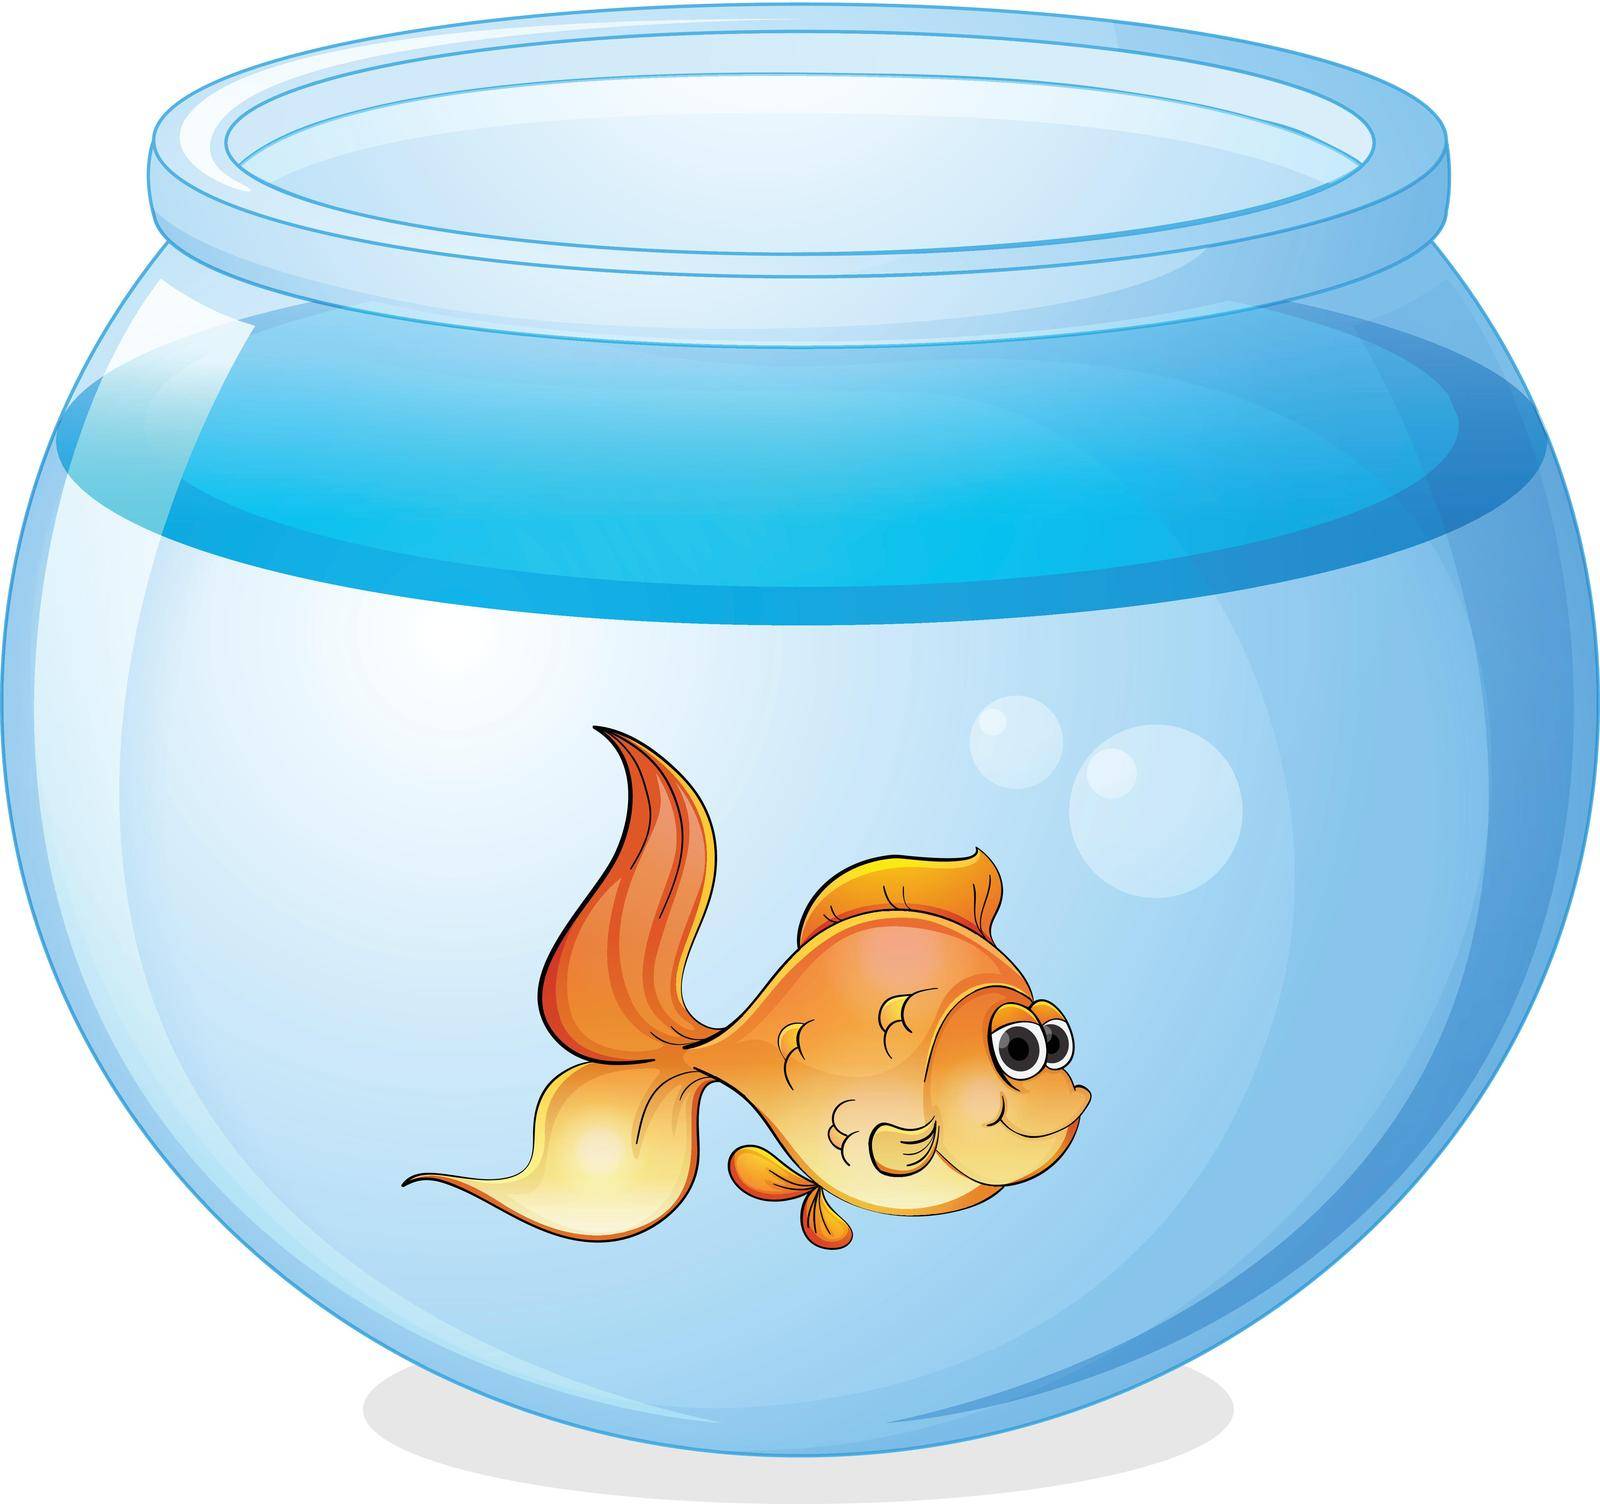 illustration of a fish and a bowl on a white background